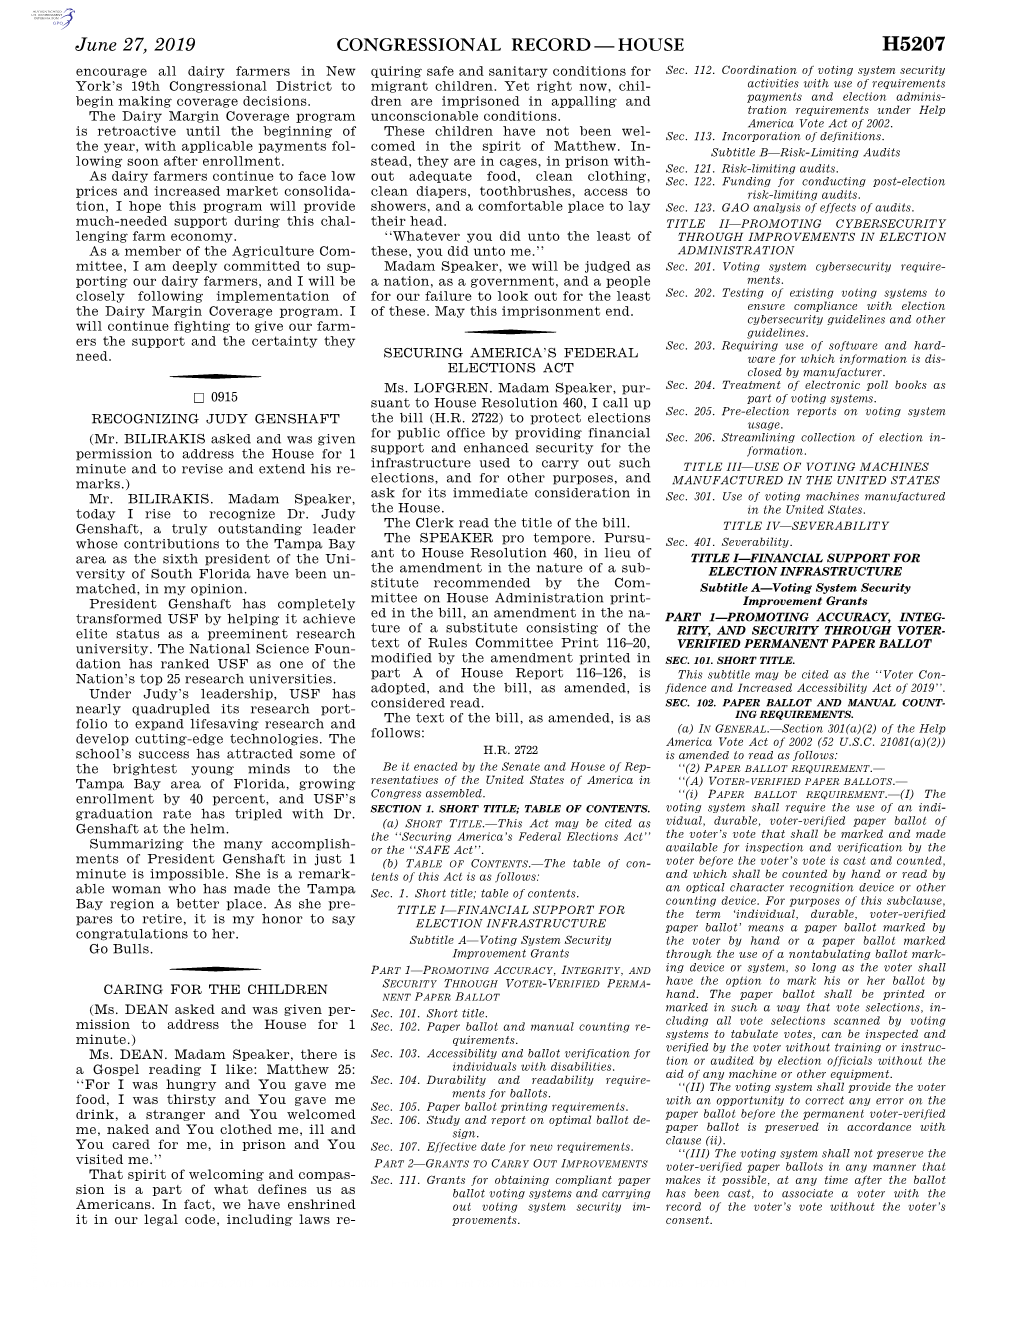 Congressional Record—House H5207